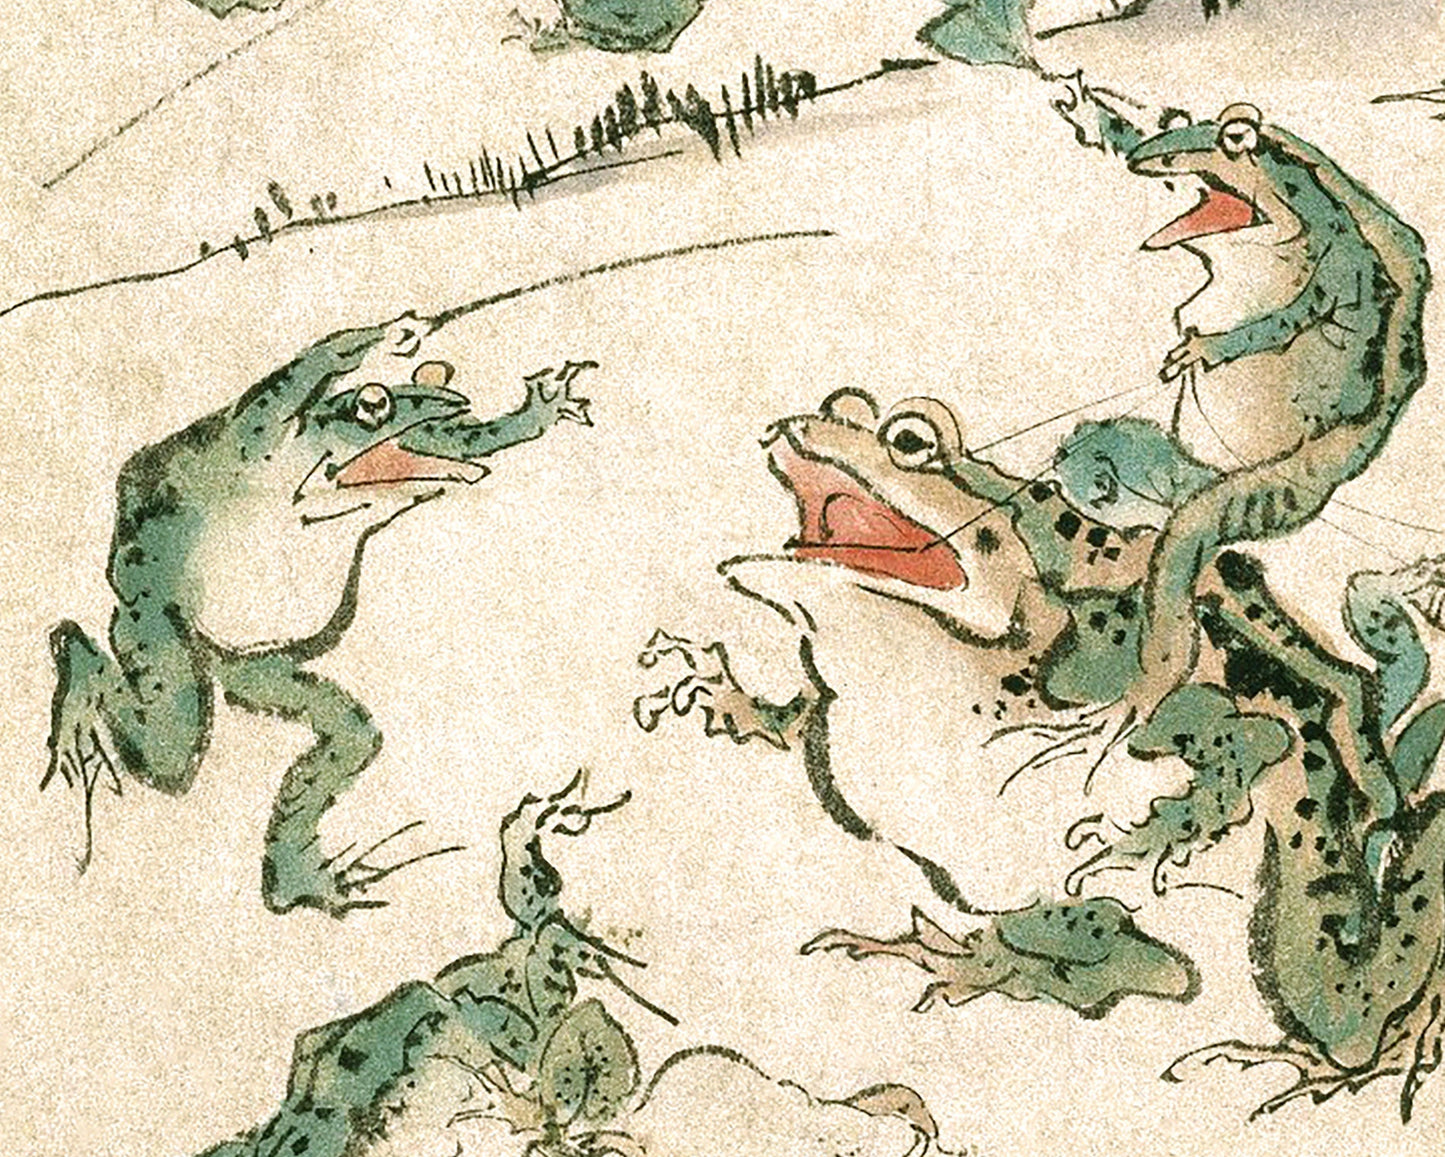 Vintage frog art | Battle of the frogs | Kawanabe Kyosai sketch | 19th century Asian art | Water, swamp animal | Modern vintage décor